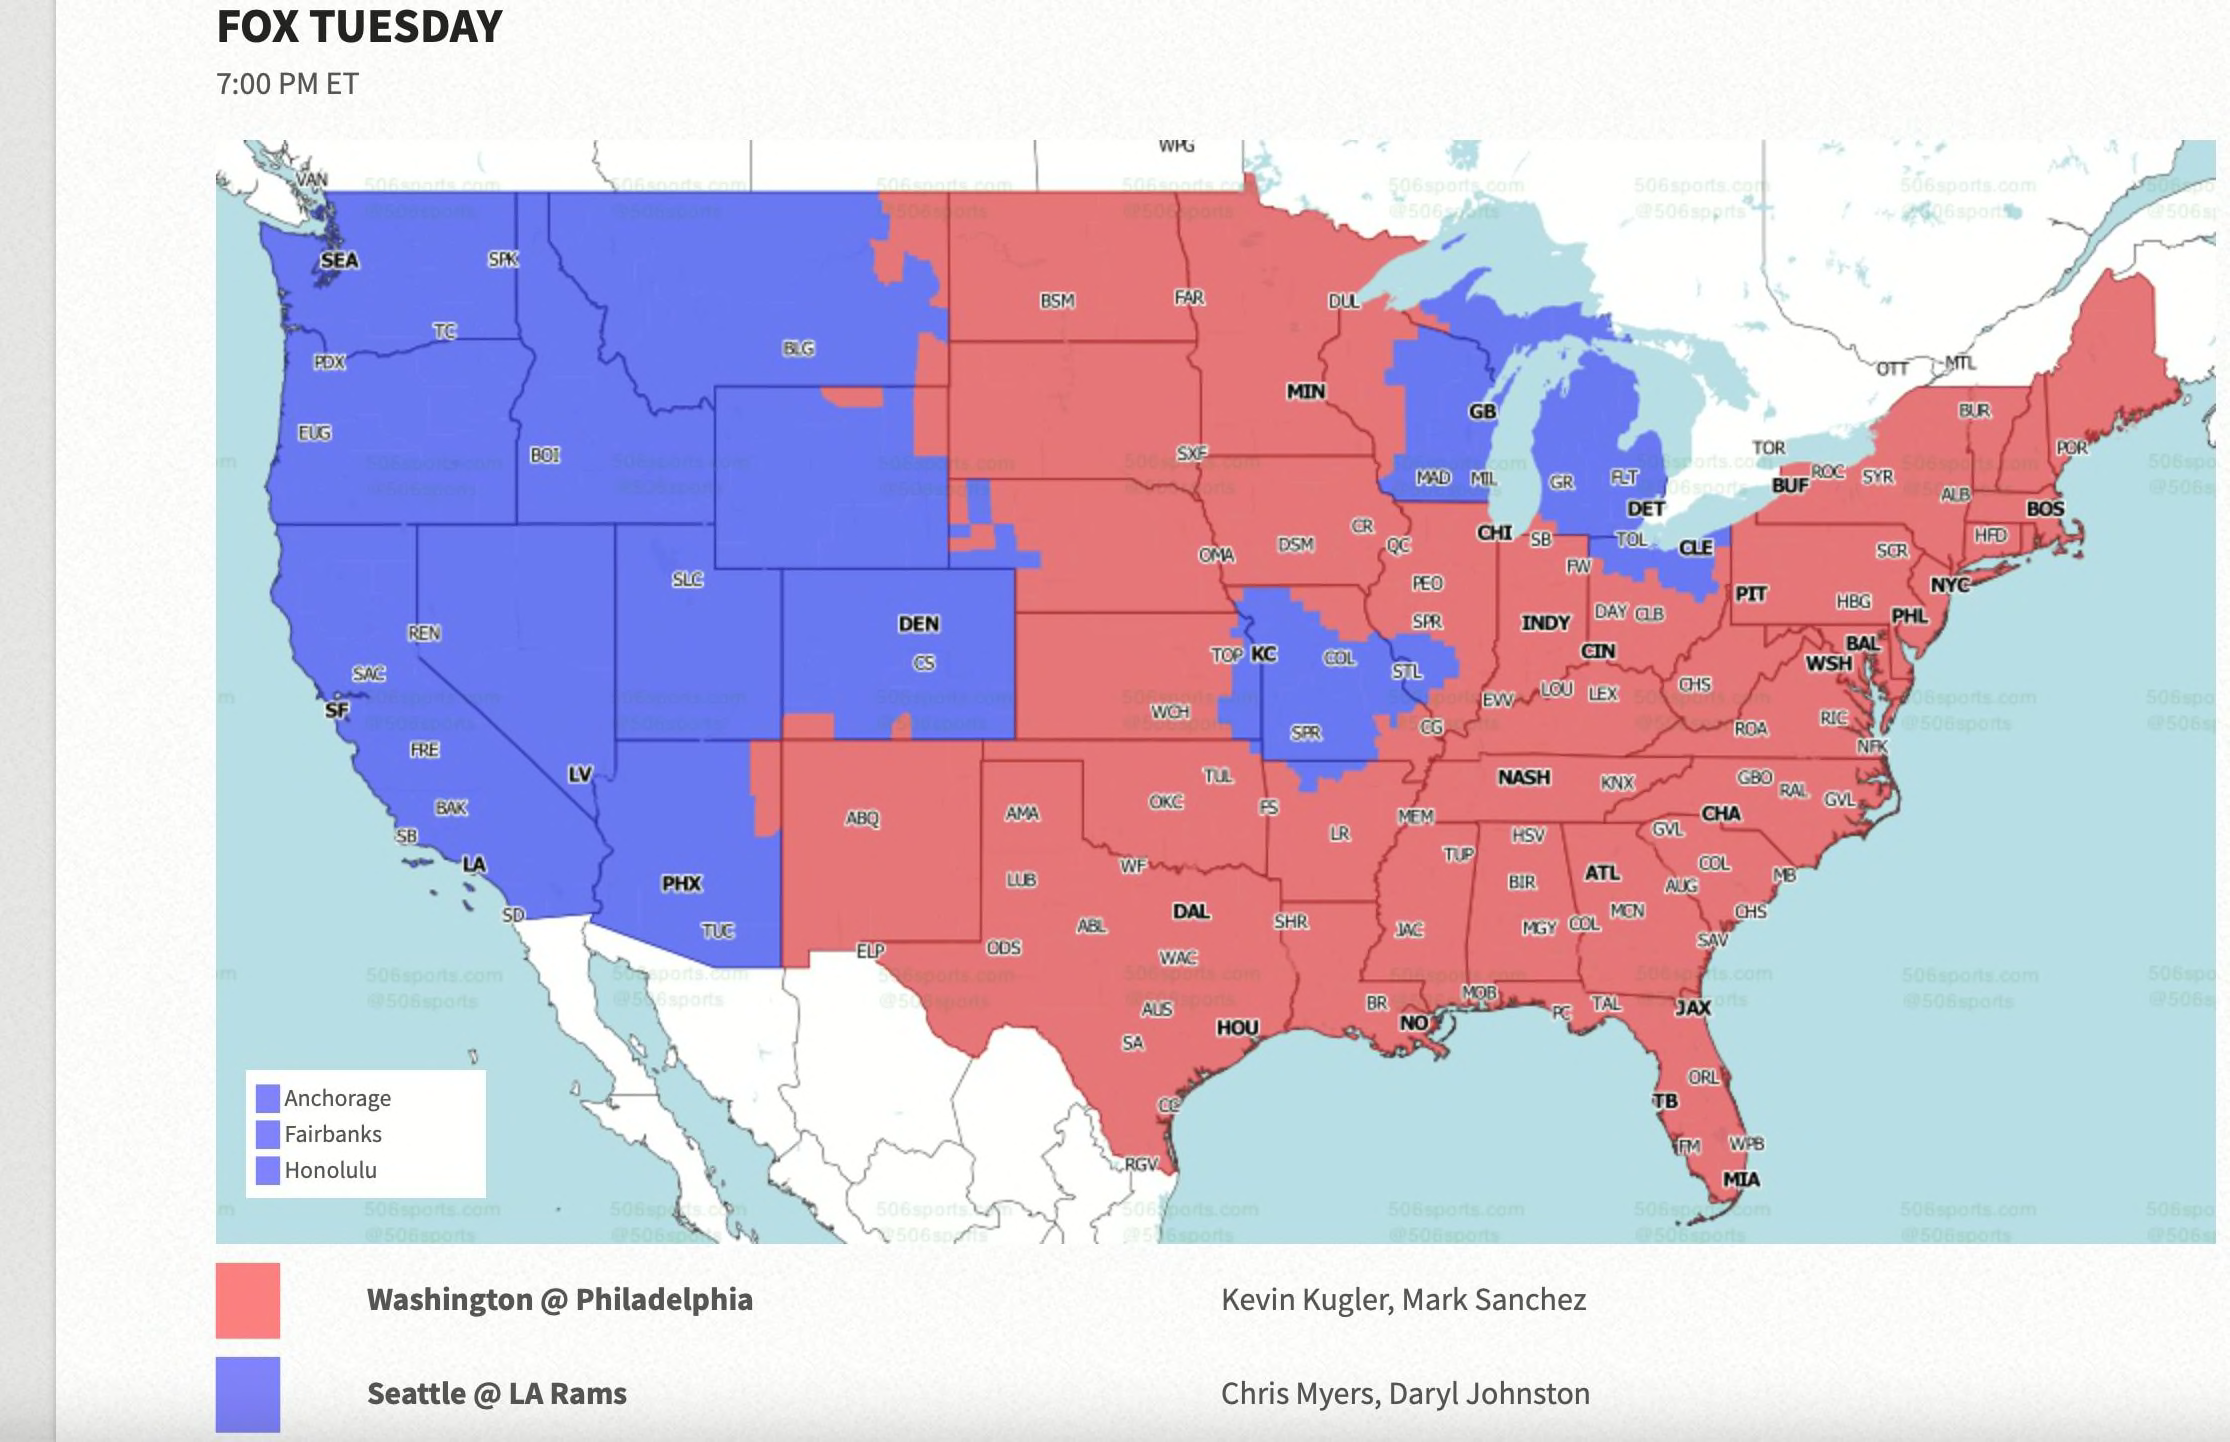 Week 15 NFL TV coverage map: Which Tuesday game is in your area?